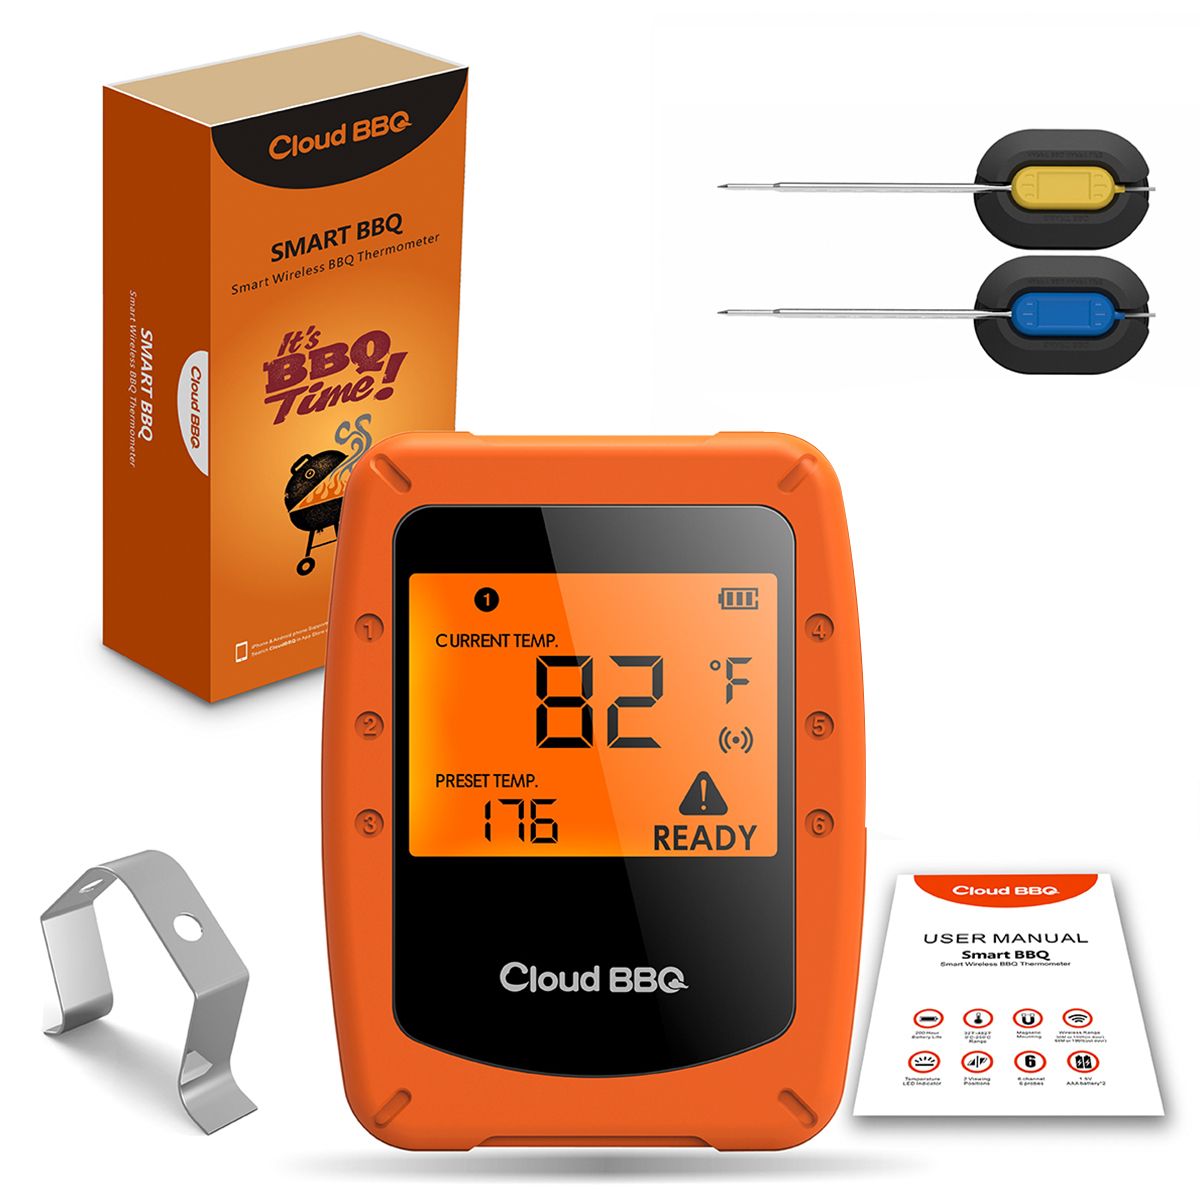 Wireless-Smart-Meat-Thermometer-2-Probes-BluetoothWiFi-For-IOS-Android-Digital-Thermometer-1460917